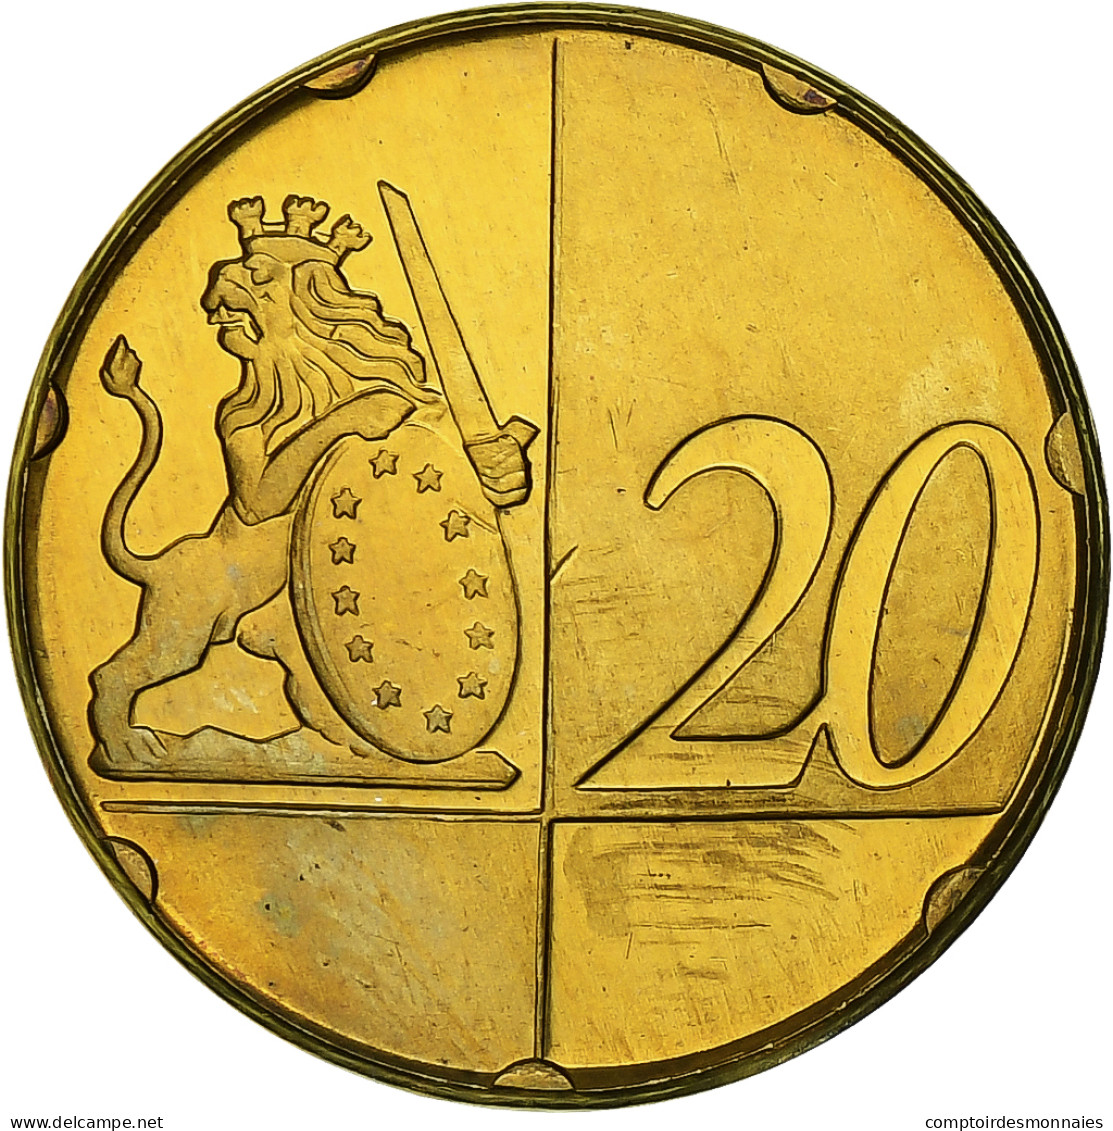 Gibraltar, 20 Euro Cent, Fantasy Euro Patterns, Essai-Trial, BE, 2004, Laiton - Private Proofs / Unofficial